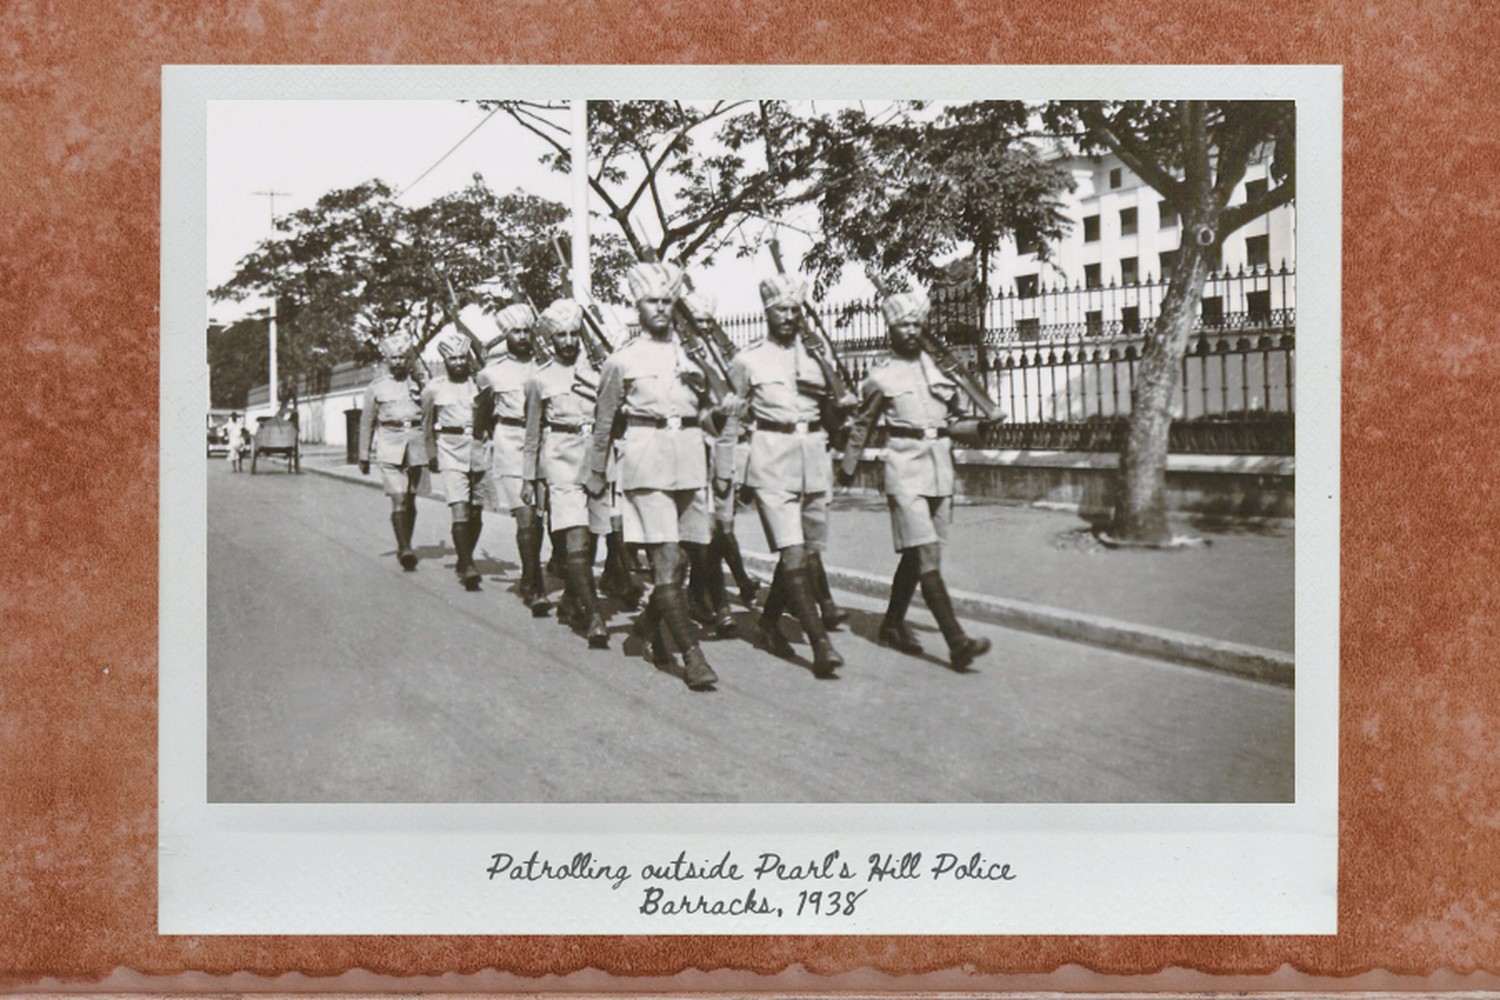 an old black and white photo of a sikh officers patrolling in a group, marching towards the right on a public road